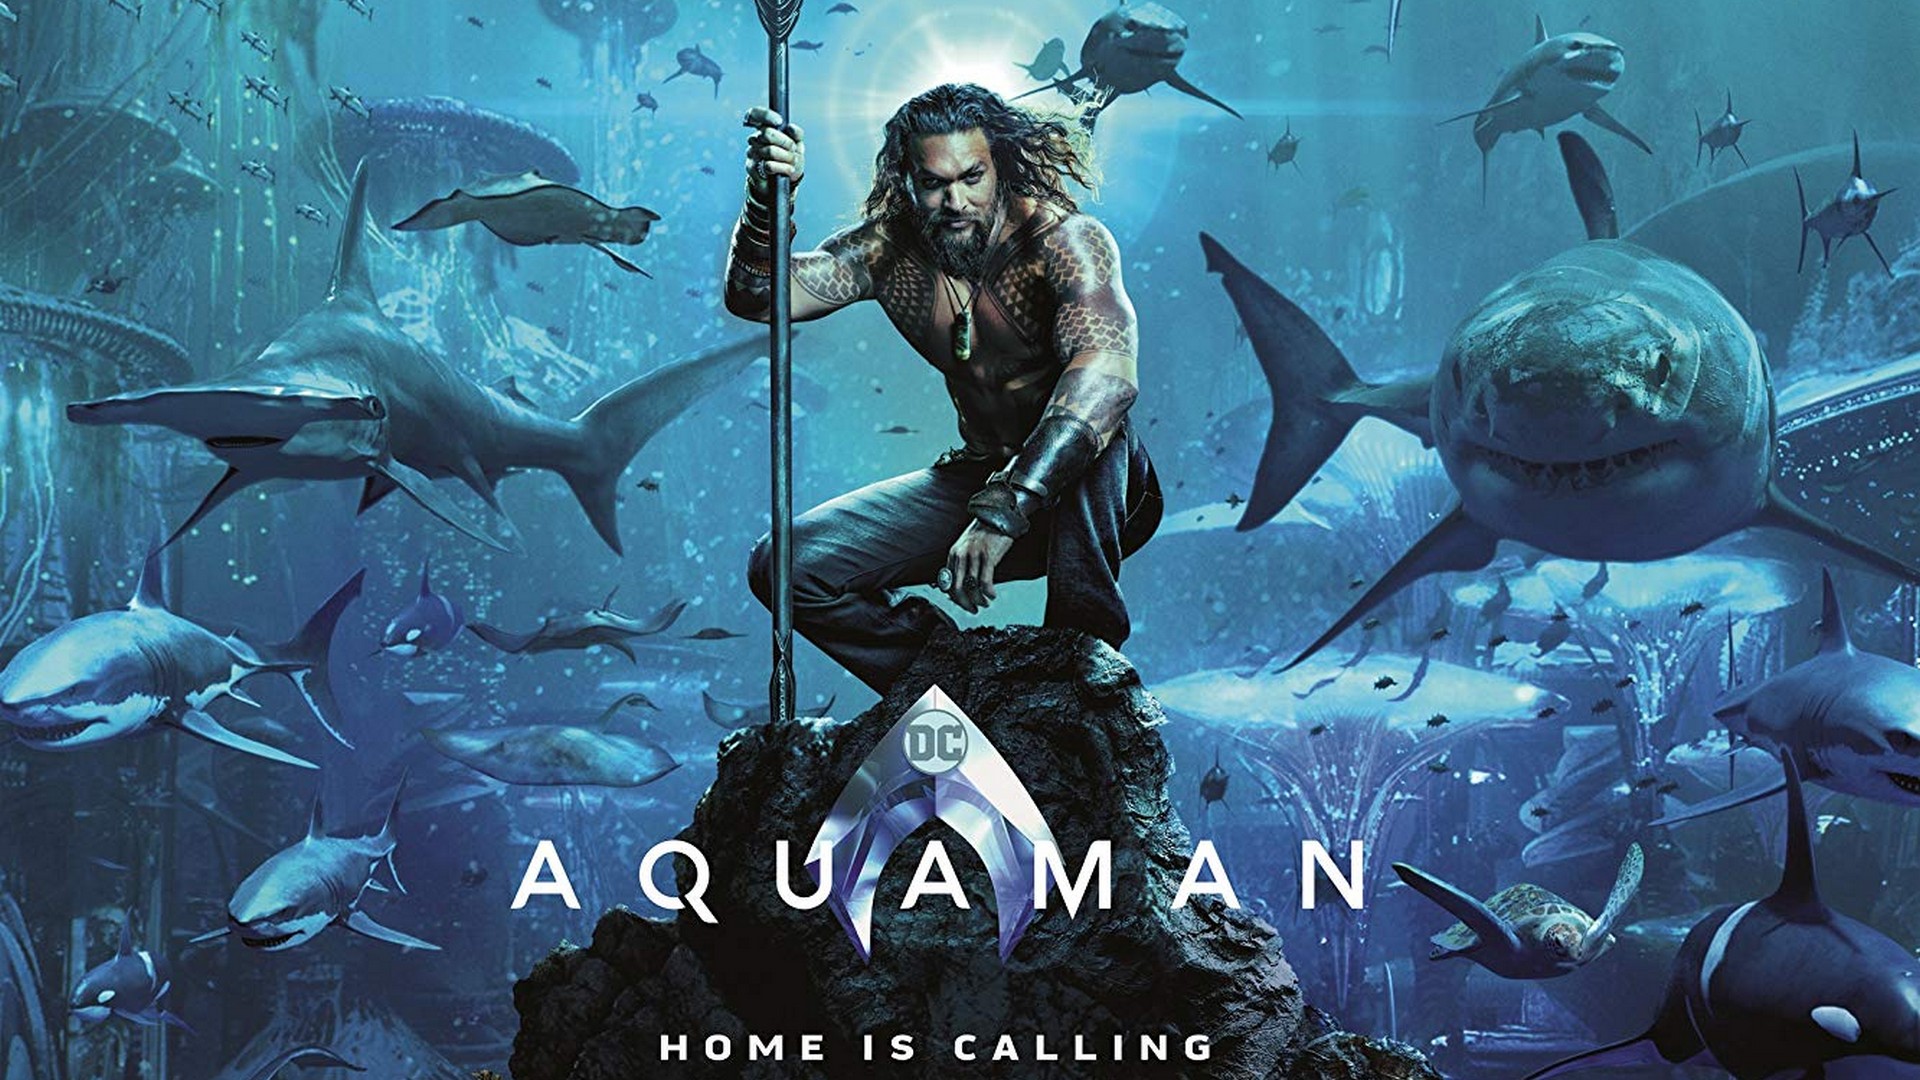 Aquaman 2018 Trailer Wallpaper With Resolution 1920X1080 pixel. You can make this wallpaper for your Mac or Windows Desktop Background, iPhone, Android or Tablet and another Smartphone device for free